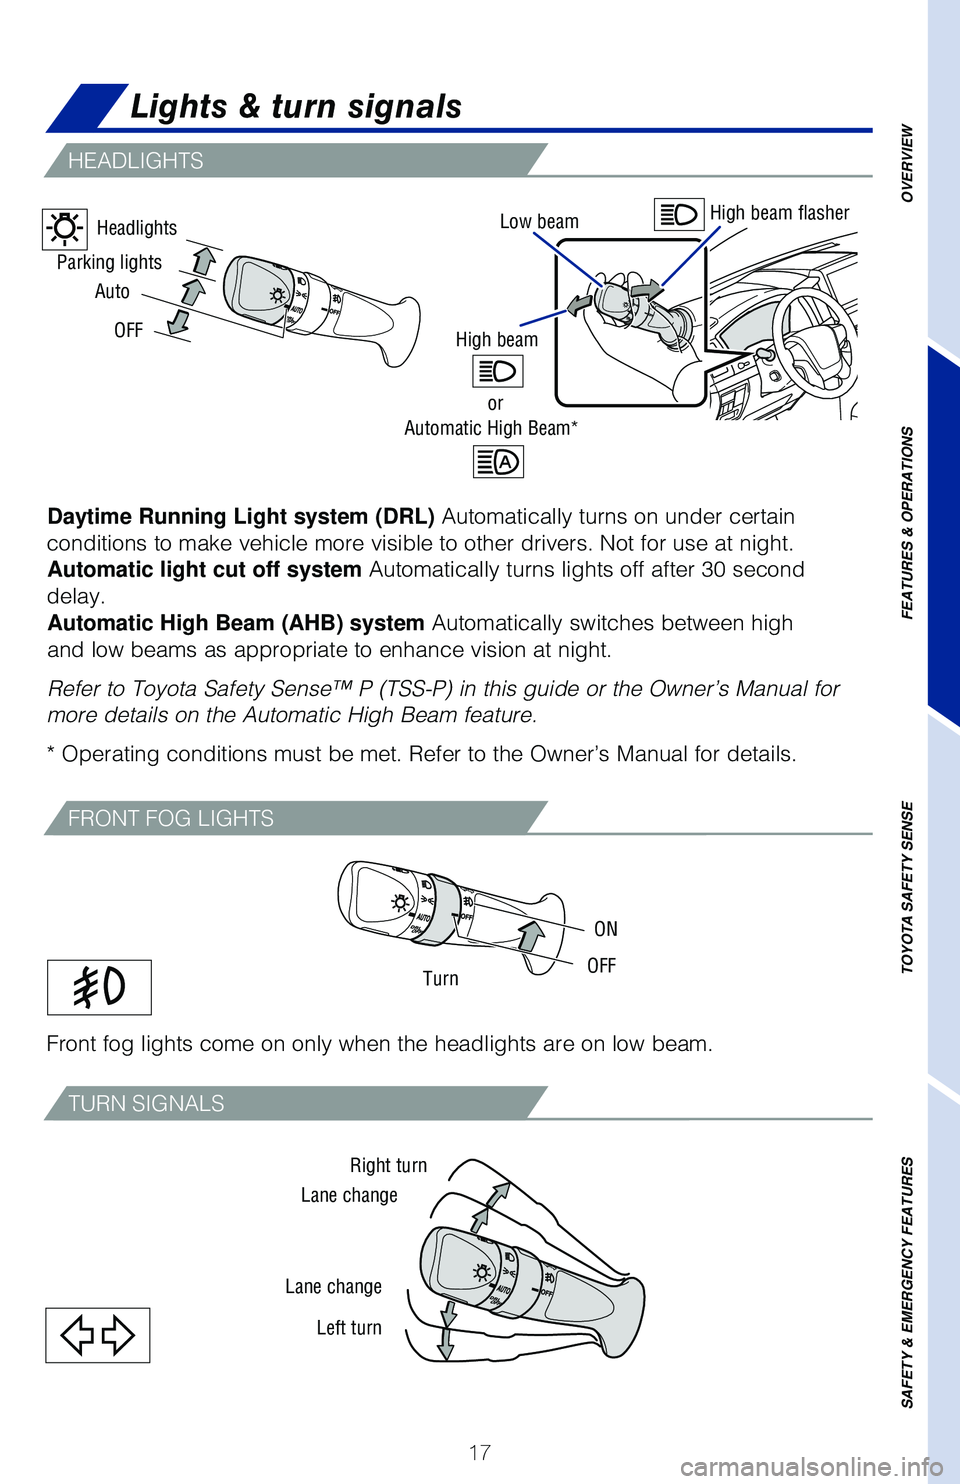 TOYOTA LAND CRUISER 2020  Owners Manual (in English) 17
OVERVIEW
FEATURES & OPERATIONS
TOYOTA SAFETY SENSE
SAFETY & EMERGENCY FEATURES
Daytime Running Light system (DRL) Automatically turns on under certain 
conditions to make vehicle more visible to ot